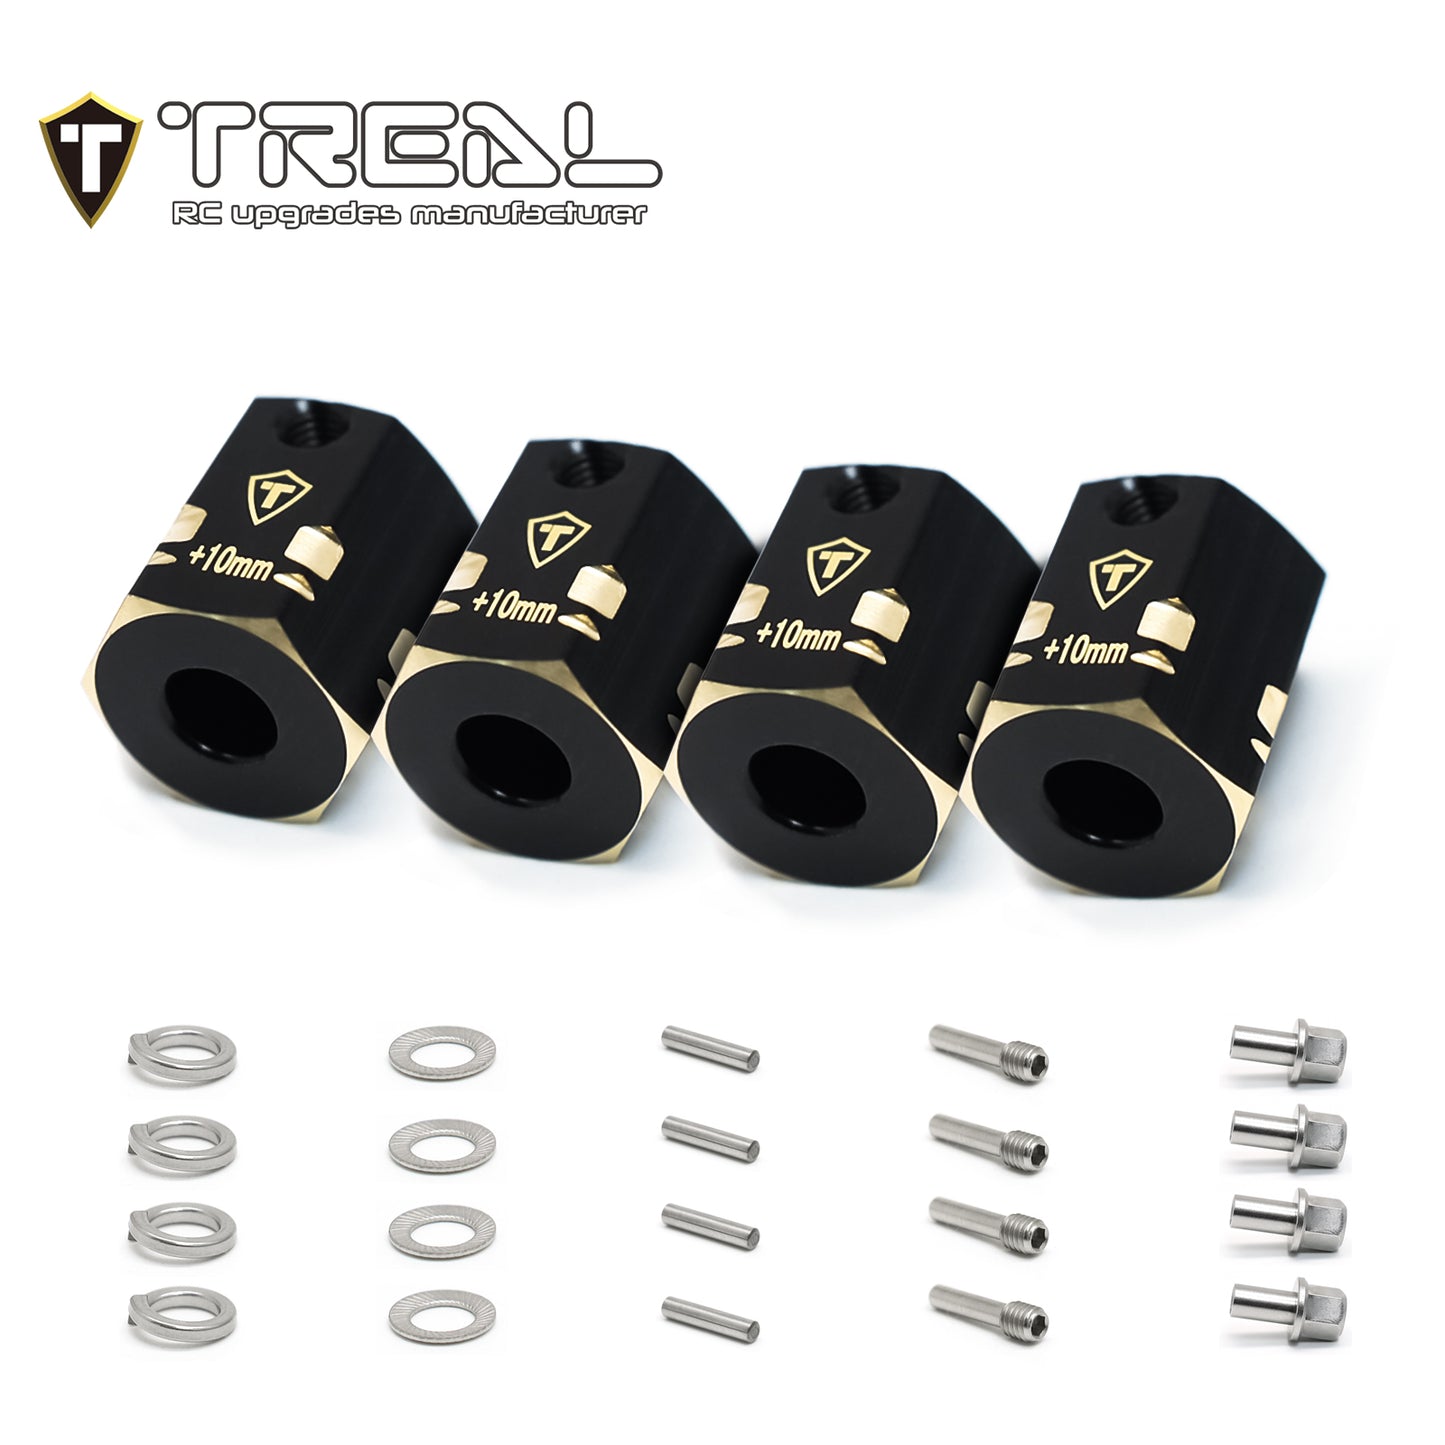 TREAL Brass 12mm Wheel Hex Adapters Extended(4pcs) for 1/10 RC Crawler Axial SCX10 PRO SCX10 III, SCX10 II ,Capra (Height:15mm)